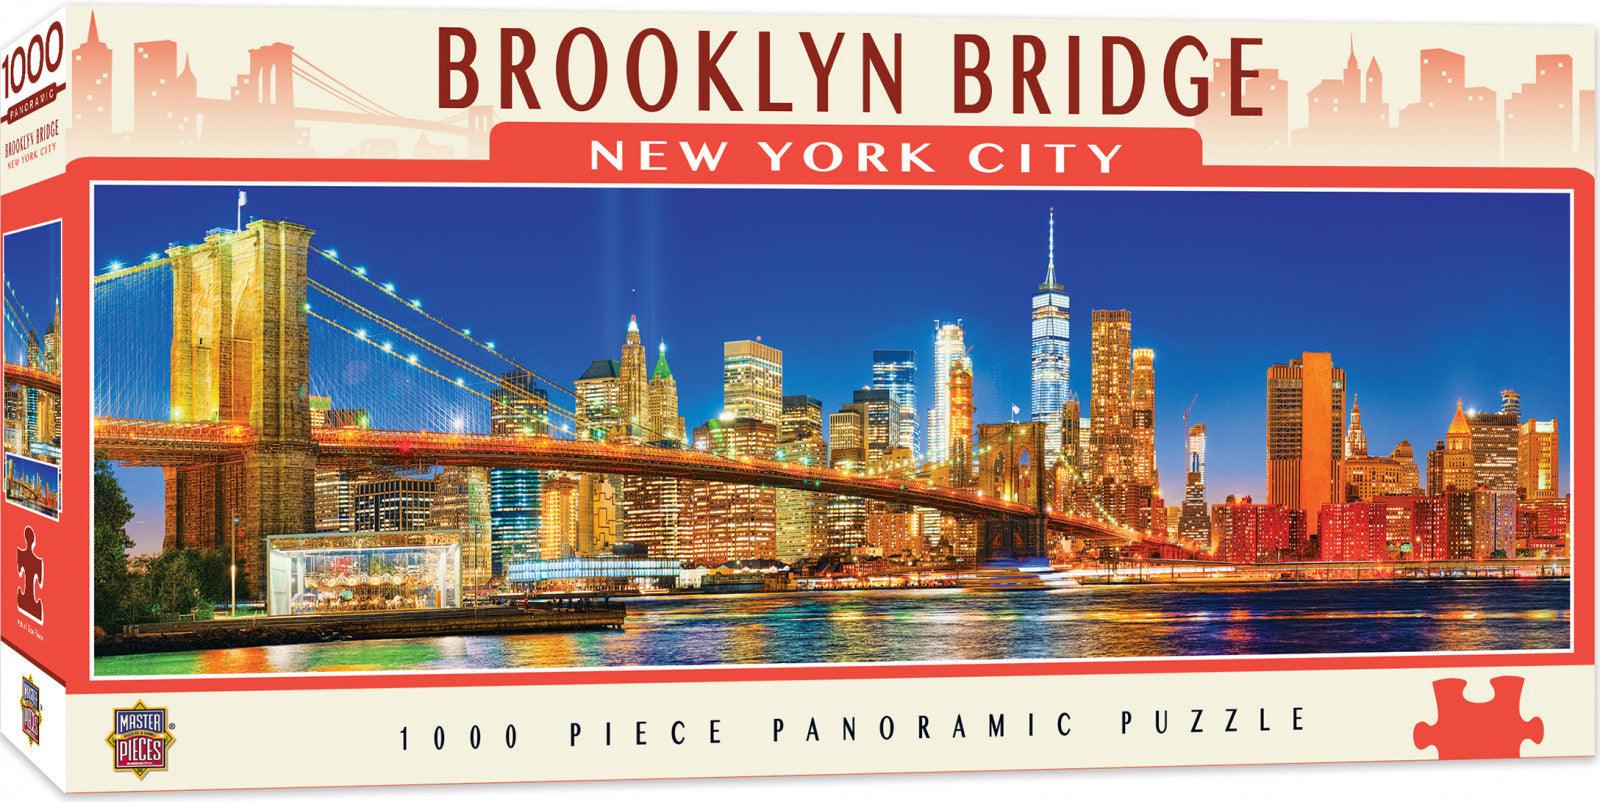 VR-81459 Masterpieces Puzzle City Panoramic Brooklyn Bridge, NYC Puzzle 1,000 pieces - Masterpieces - Titan Pop Culture